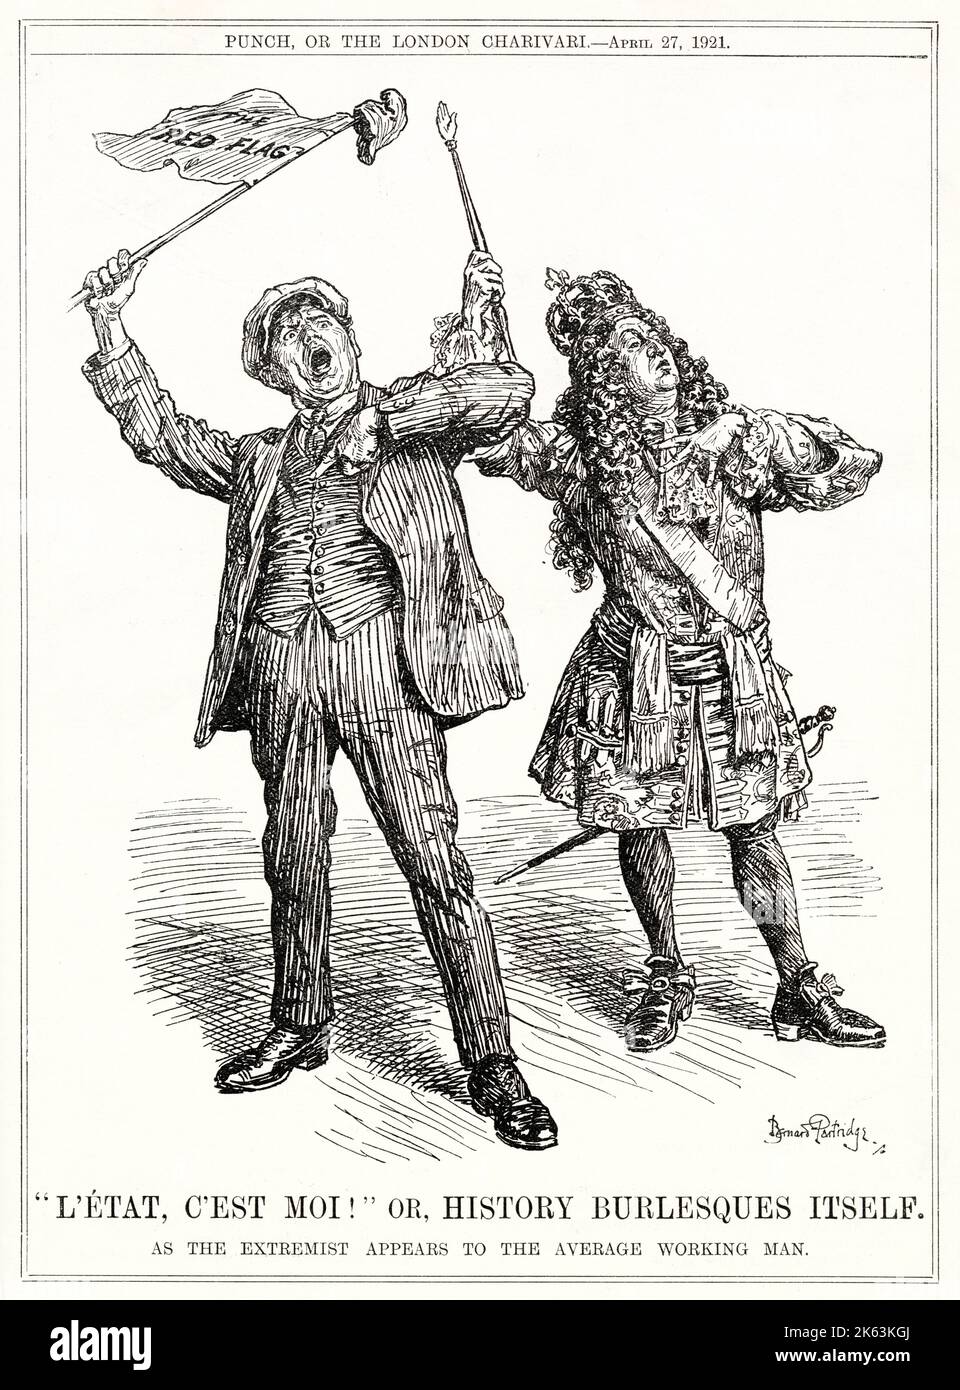 Cartoon, L'Etat, C'Est Moi! or, History Burlesques Itself -- dictatorship of the proletariat, showing a left-wing extremist just as detached from the common people as King Louis XVI was.      Date: 1921 Stock Photo